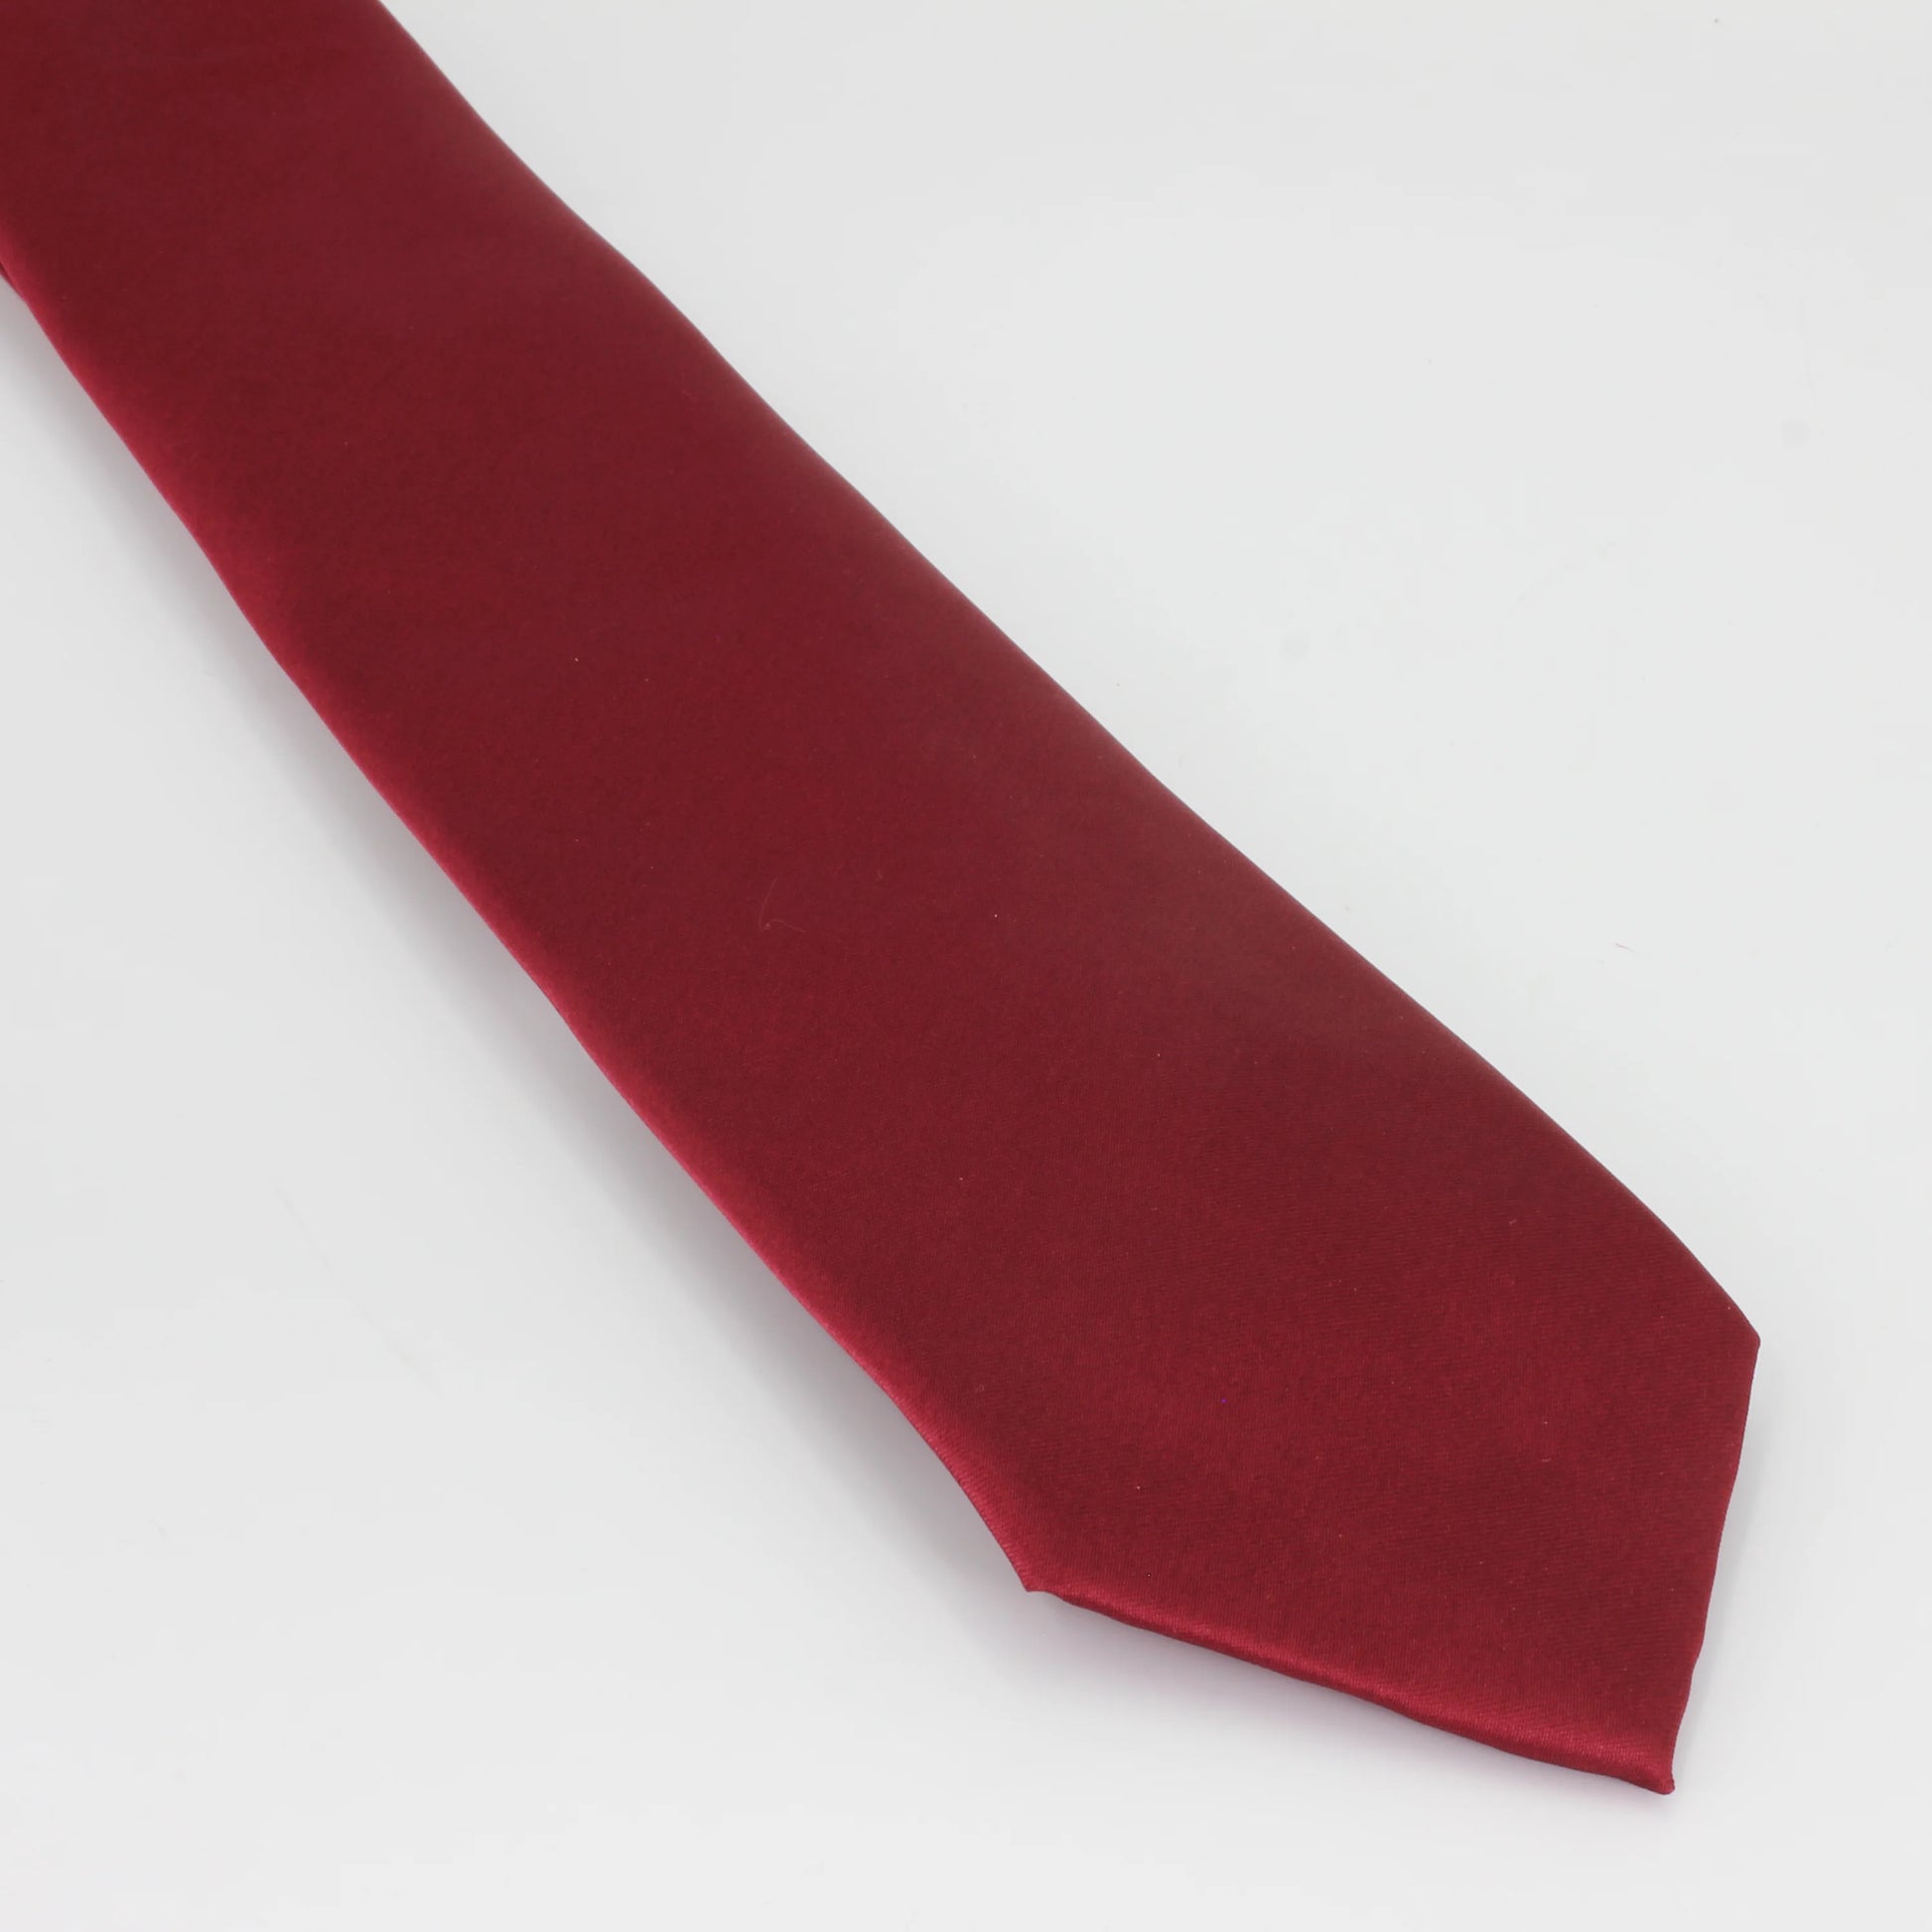 Shop Men's Classic Formal Tie in Red or browse our range of ties for men in a variety of colours in-store at Aliverti Cape Town, or shop online. We deliver in South Africa & offer multiple payment plans as well as accept multiple safe & secure payment methods.